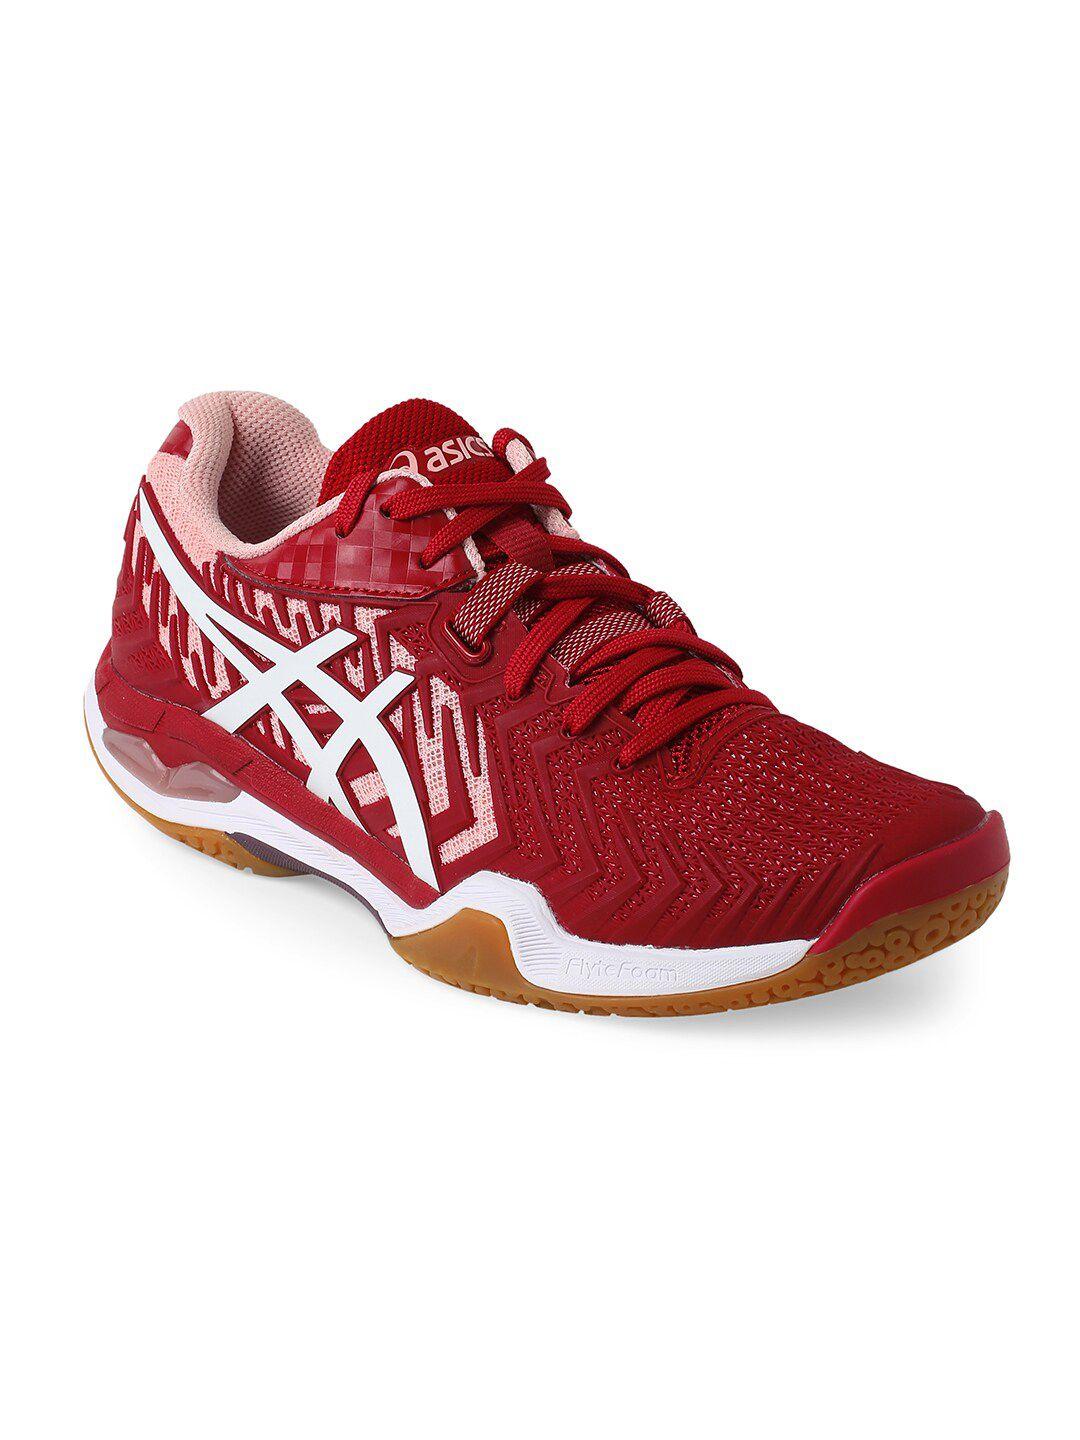 asics women red court control ff 2 badminton non-marking shoes